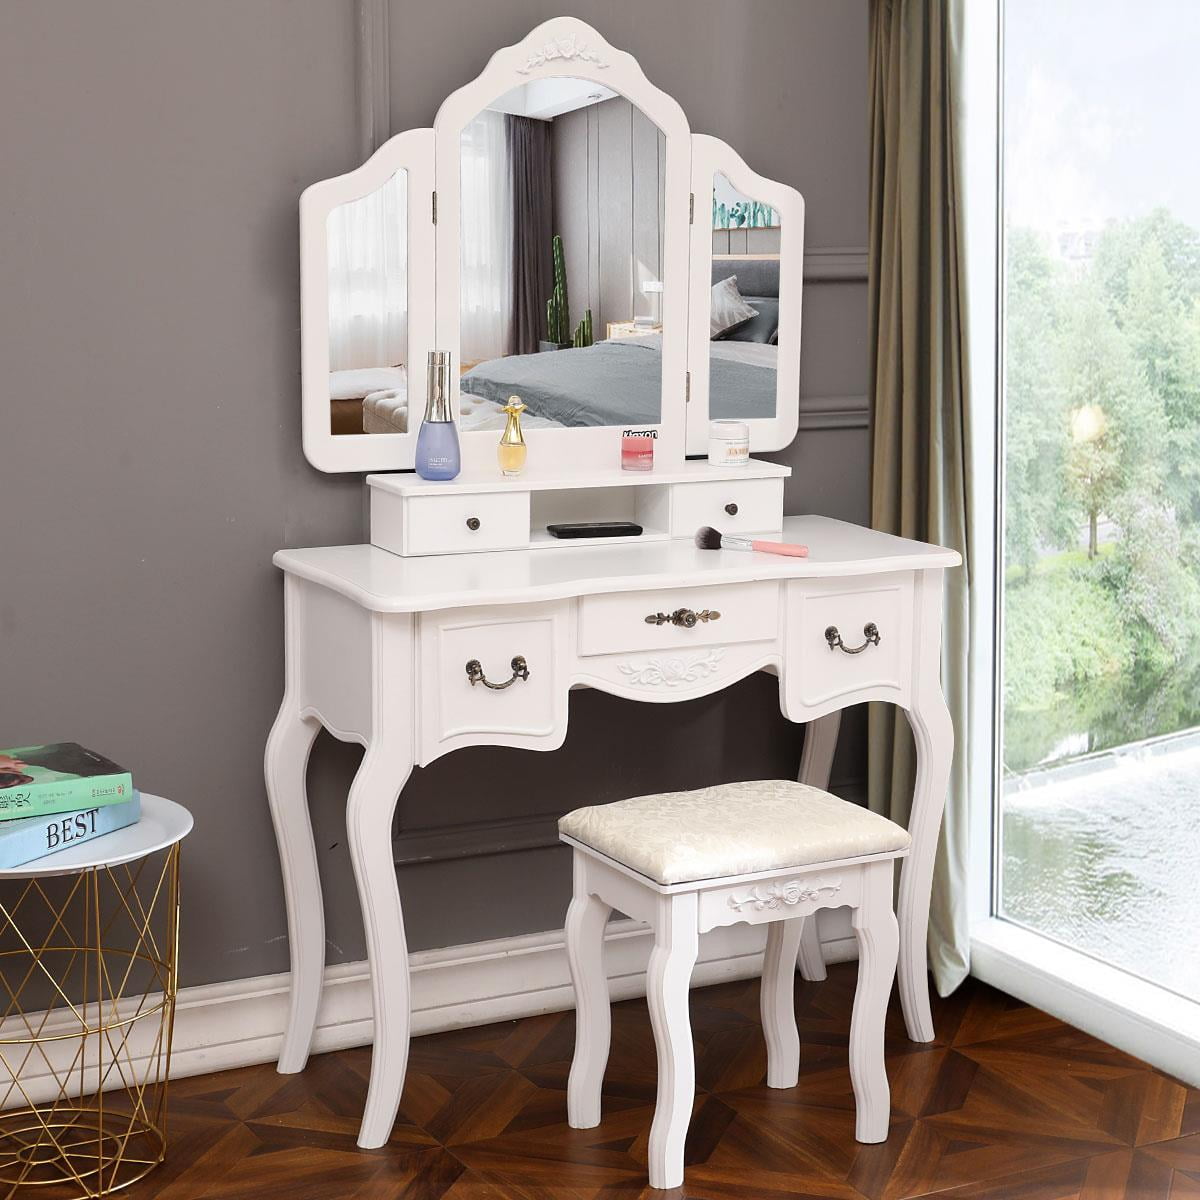 Vanity Beauty Station Makeup Table&Wooden Stool 3 Mirrors And 5 Drawers Set 